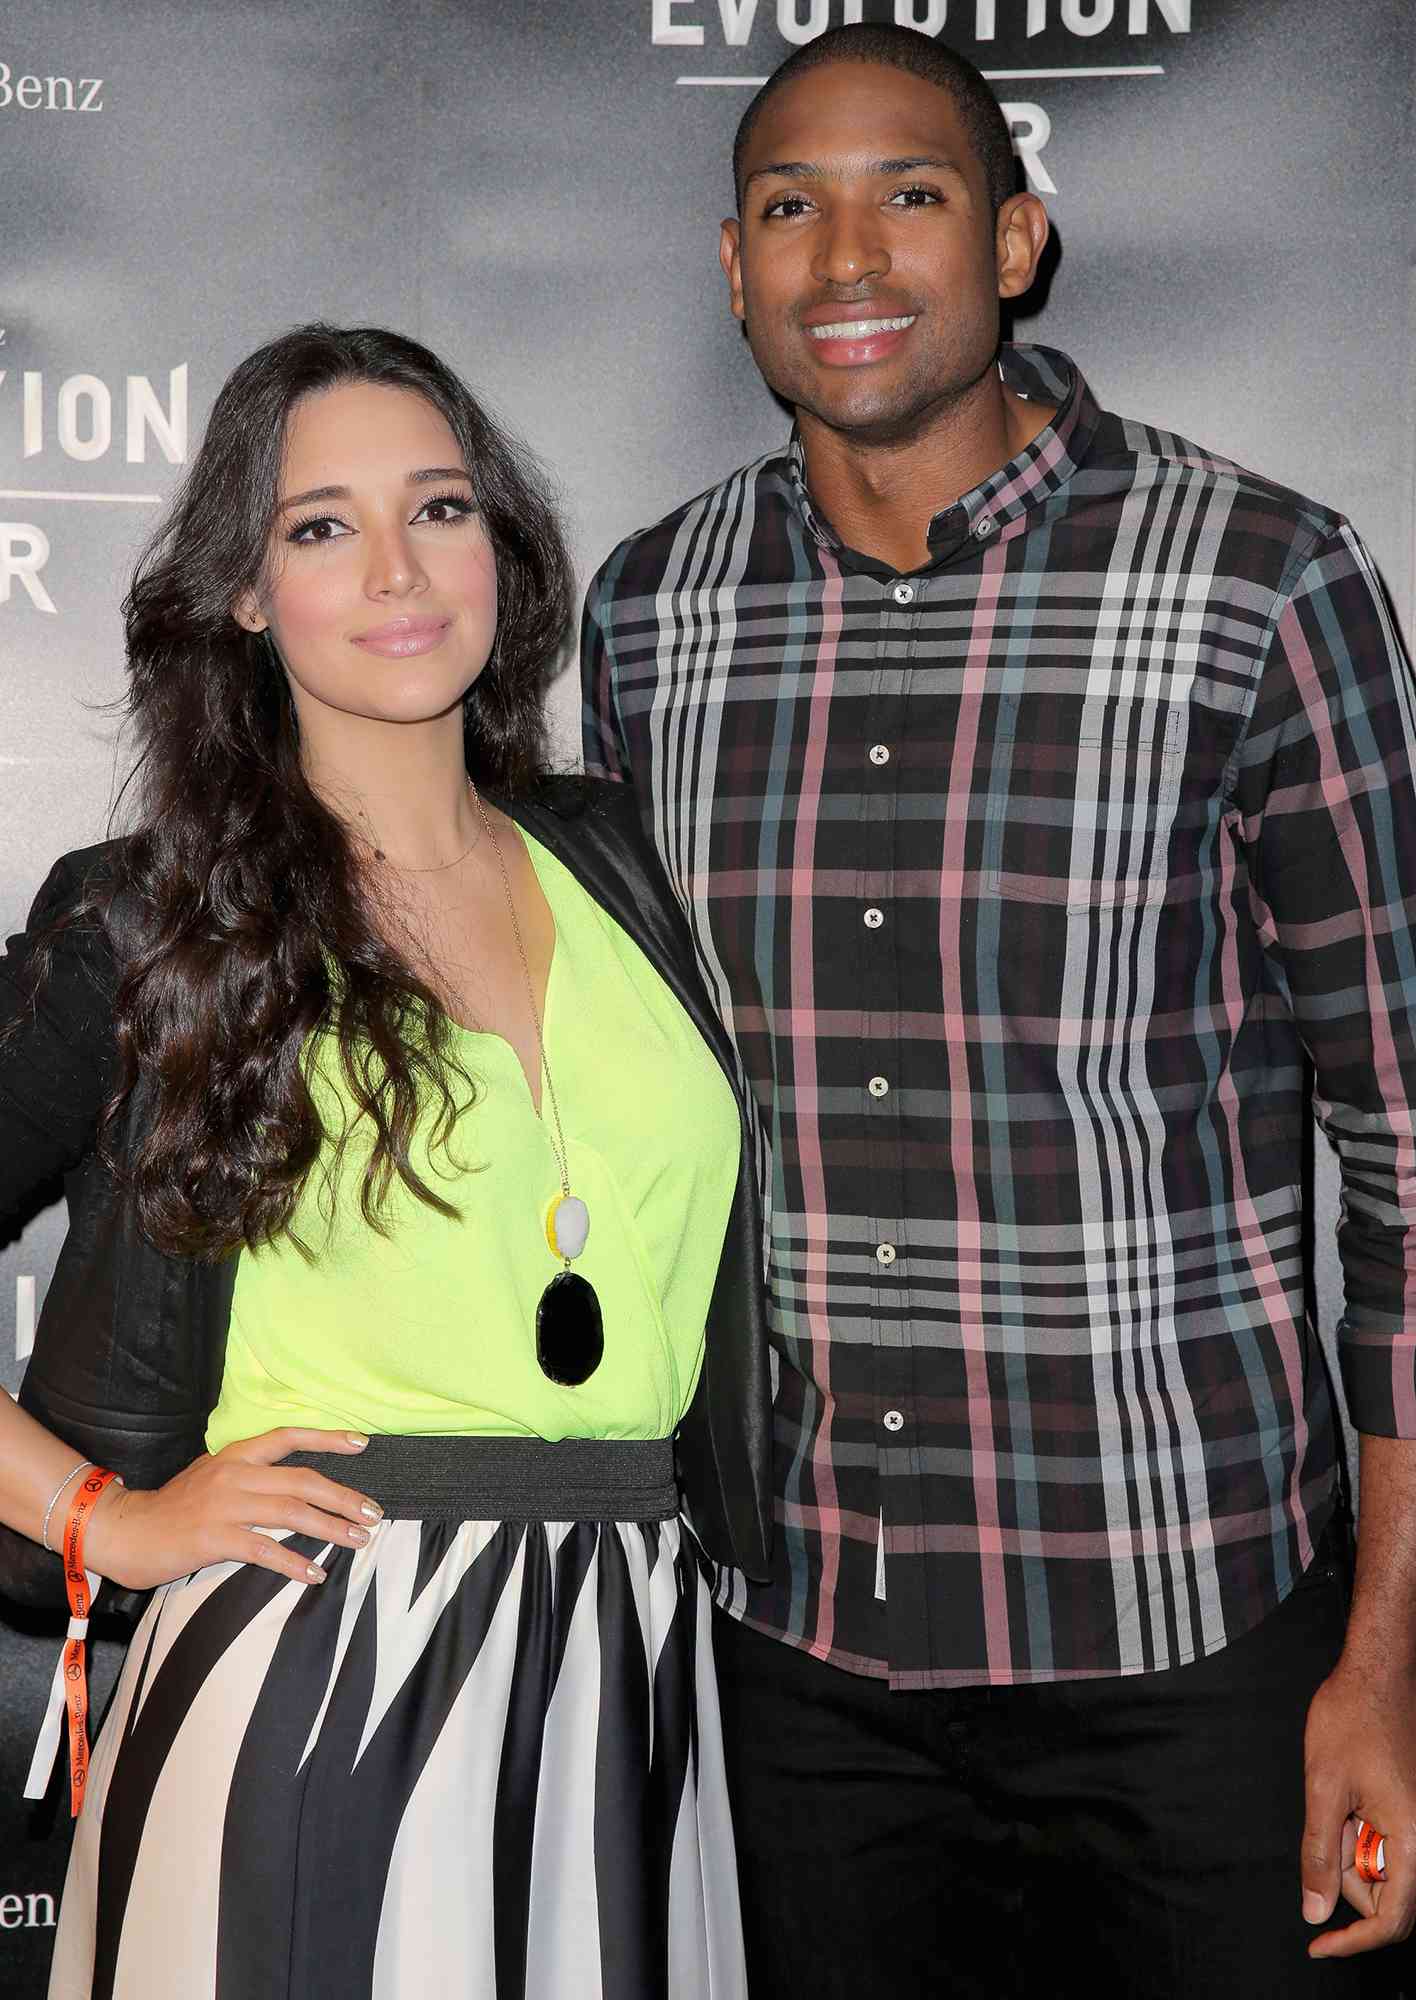 Amelia Vega and Al Horford attend the Mercedes-Benz 2015 Evolution Tour on August 4, 2015 in Los Angeles, California.